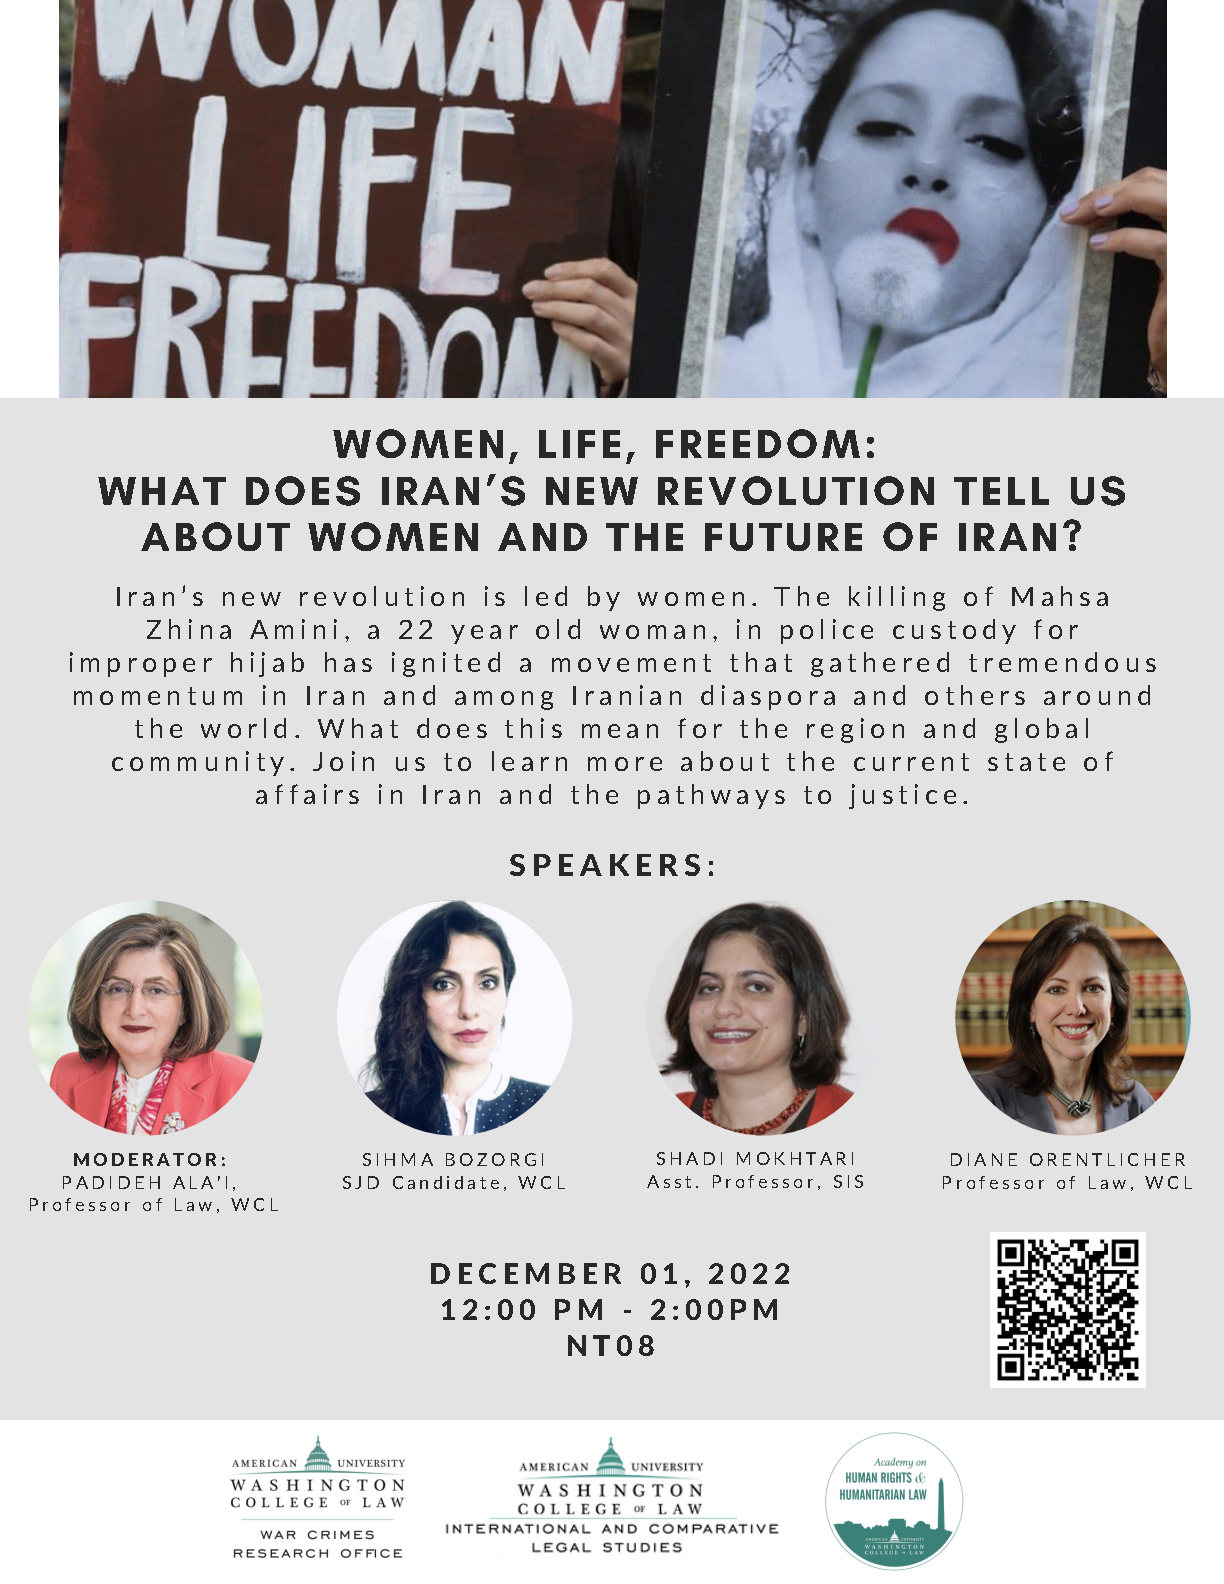 Women, Life Freedom: What Does Iran's New Revolution Tell us about Women and the Future of Iran?